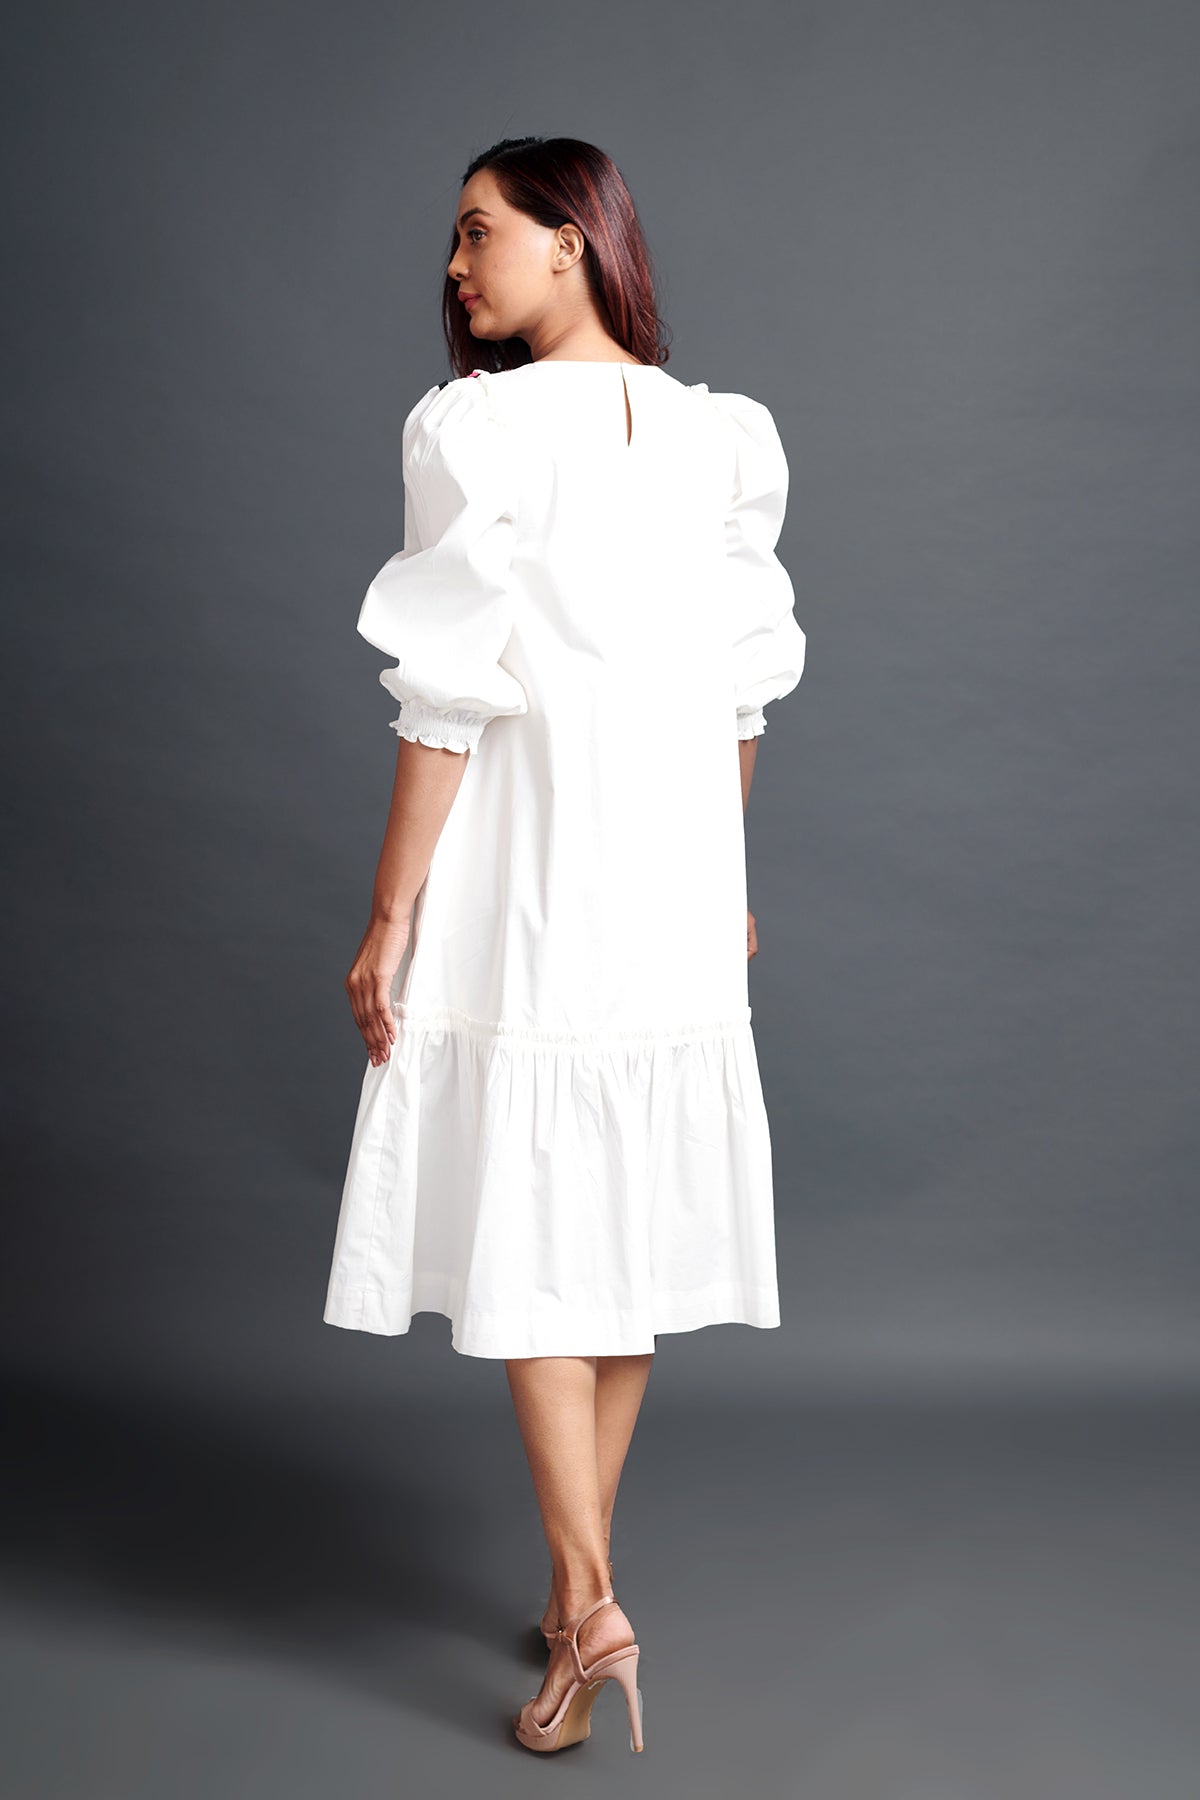 Image of WHITE GATHERED HEM DRESS IN COTTON BASE WITH CUTWORK EMBROIDERY. From savoirfashions.com